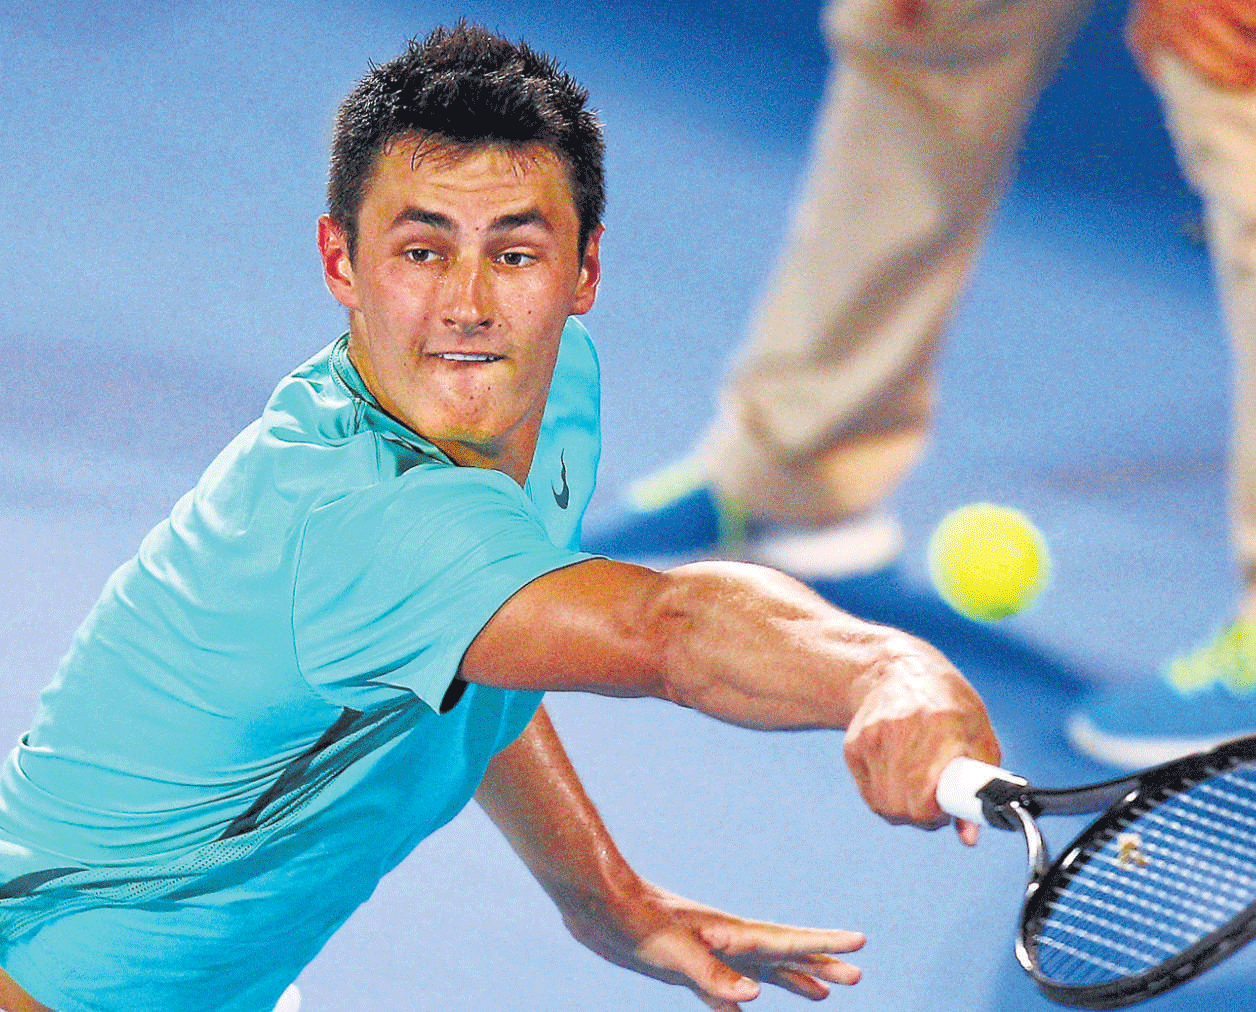 Courting problems: Bernard Tomic has the talent but his control-freak father John has often landed in trouble. Last week, he head-butted Tomic's training partner Thomas Drouet, causing injuries and raising a furore. AFP Photo.